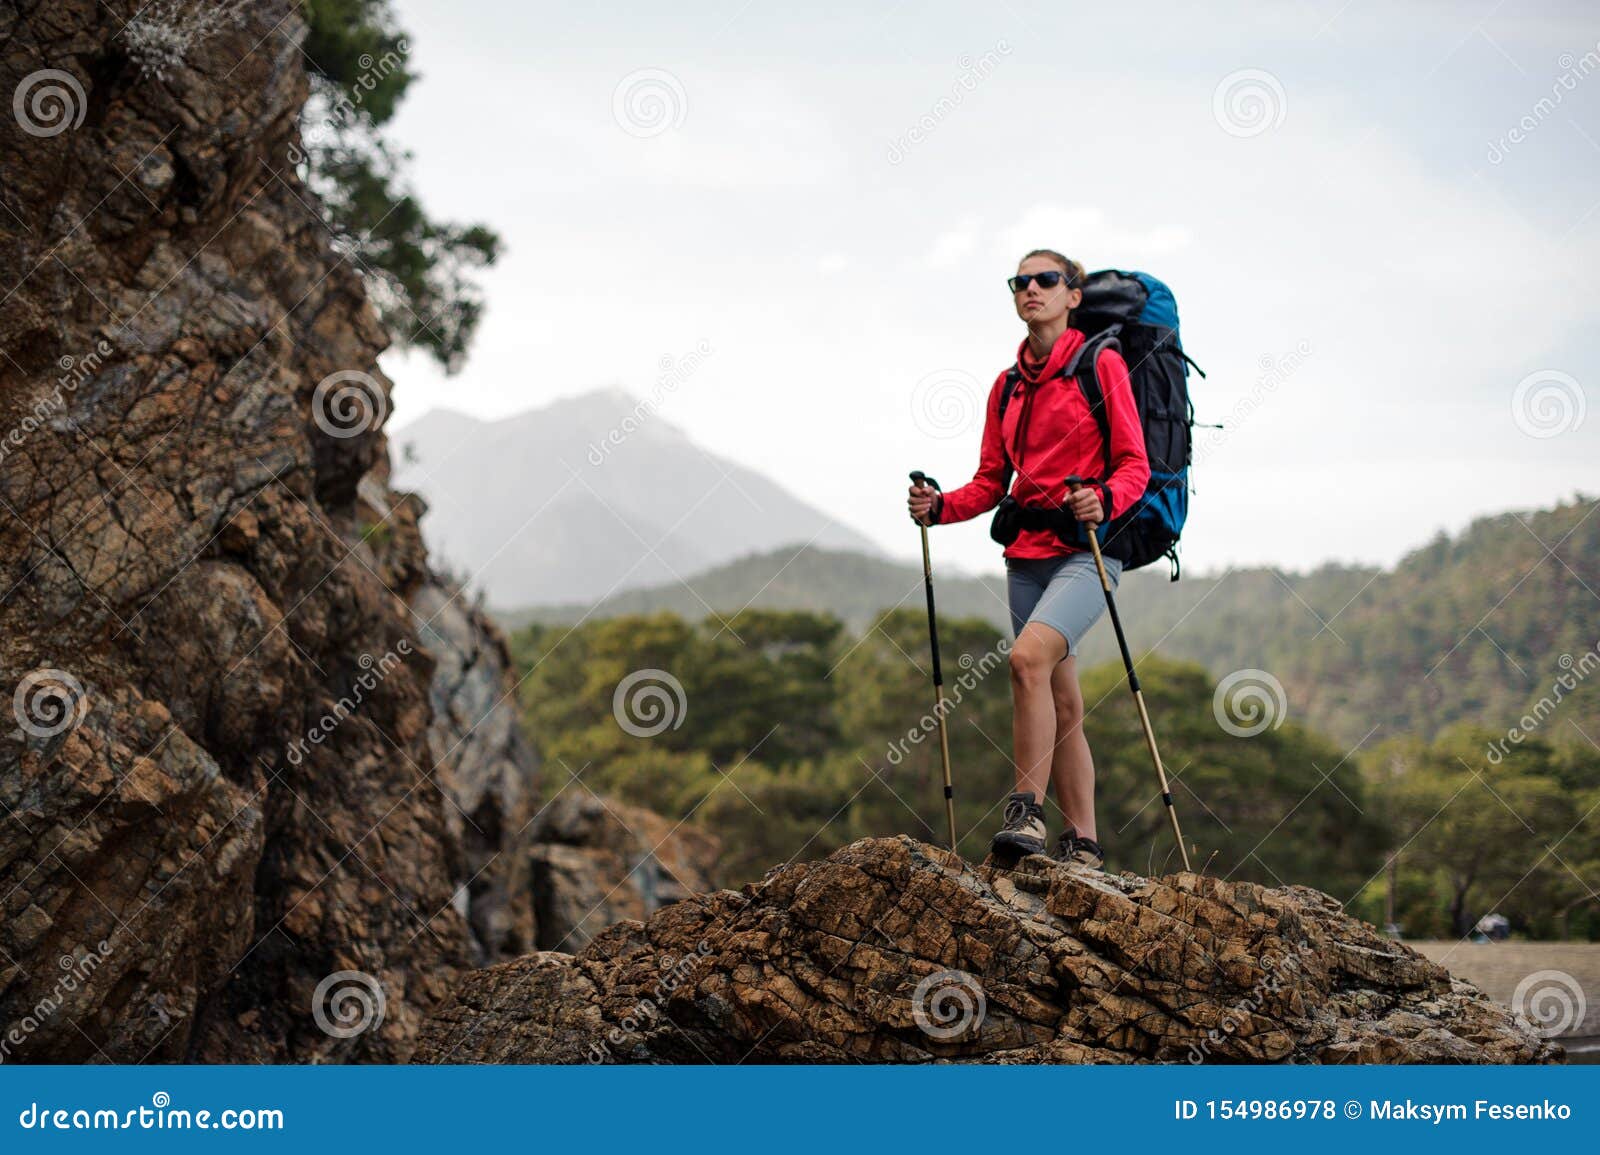 Hiker poses on the side Stock Photos and Images | agefotostock